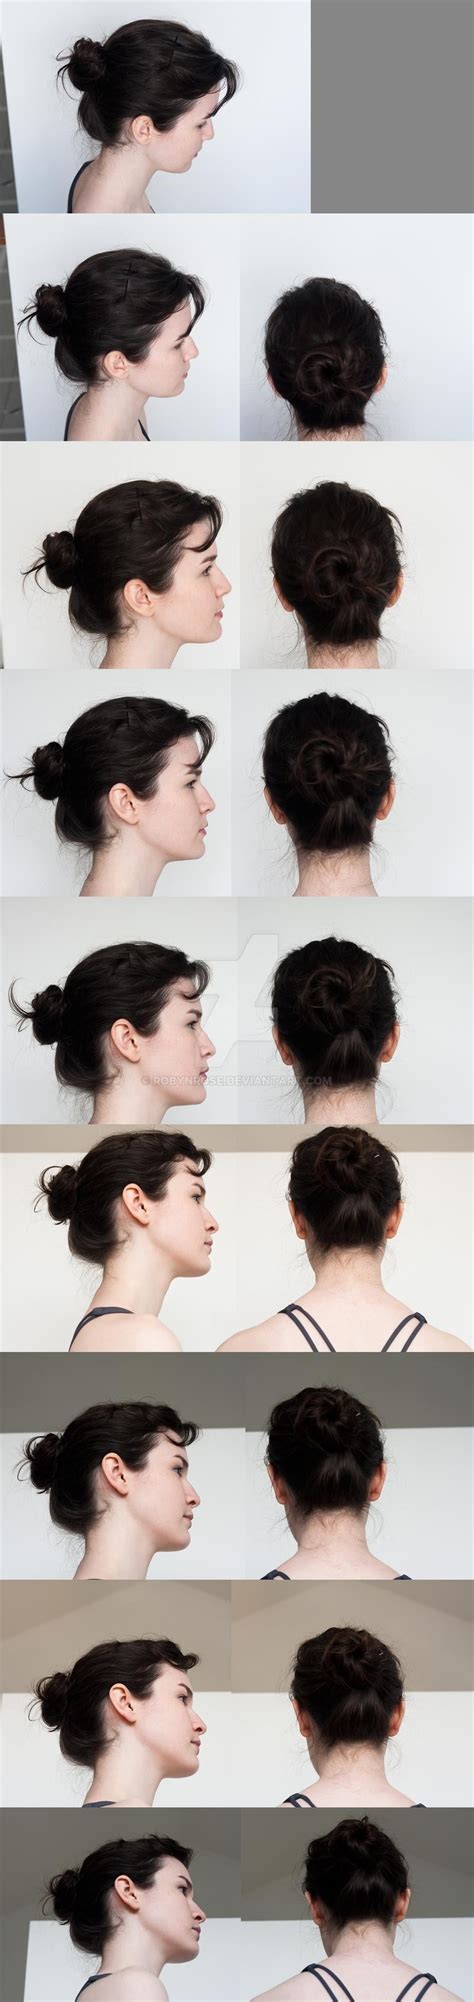 Head Turnaround Top To Bottom Profile By Robynrose On Deviantart In